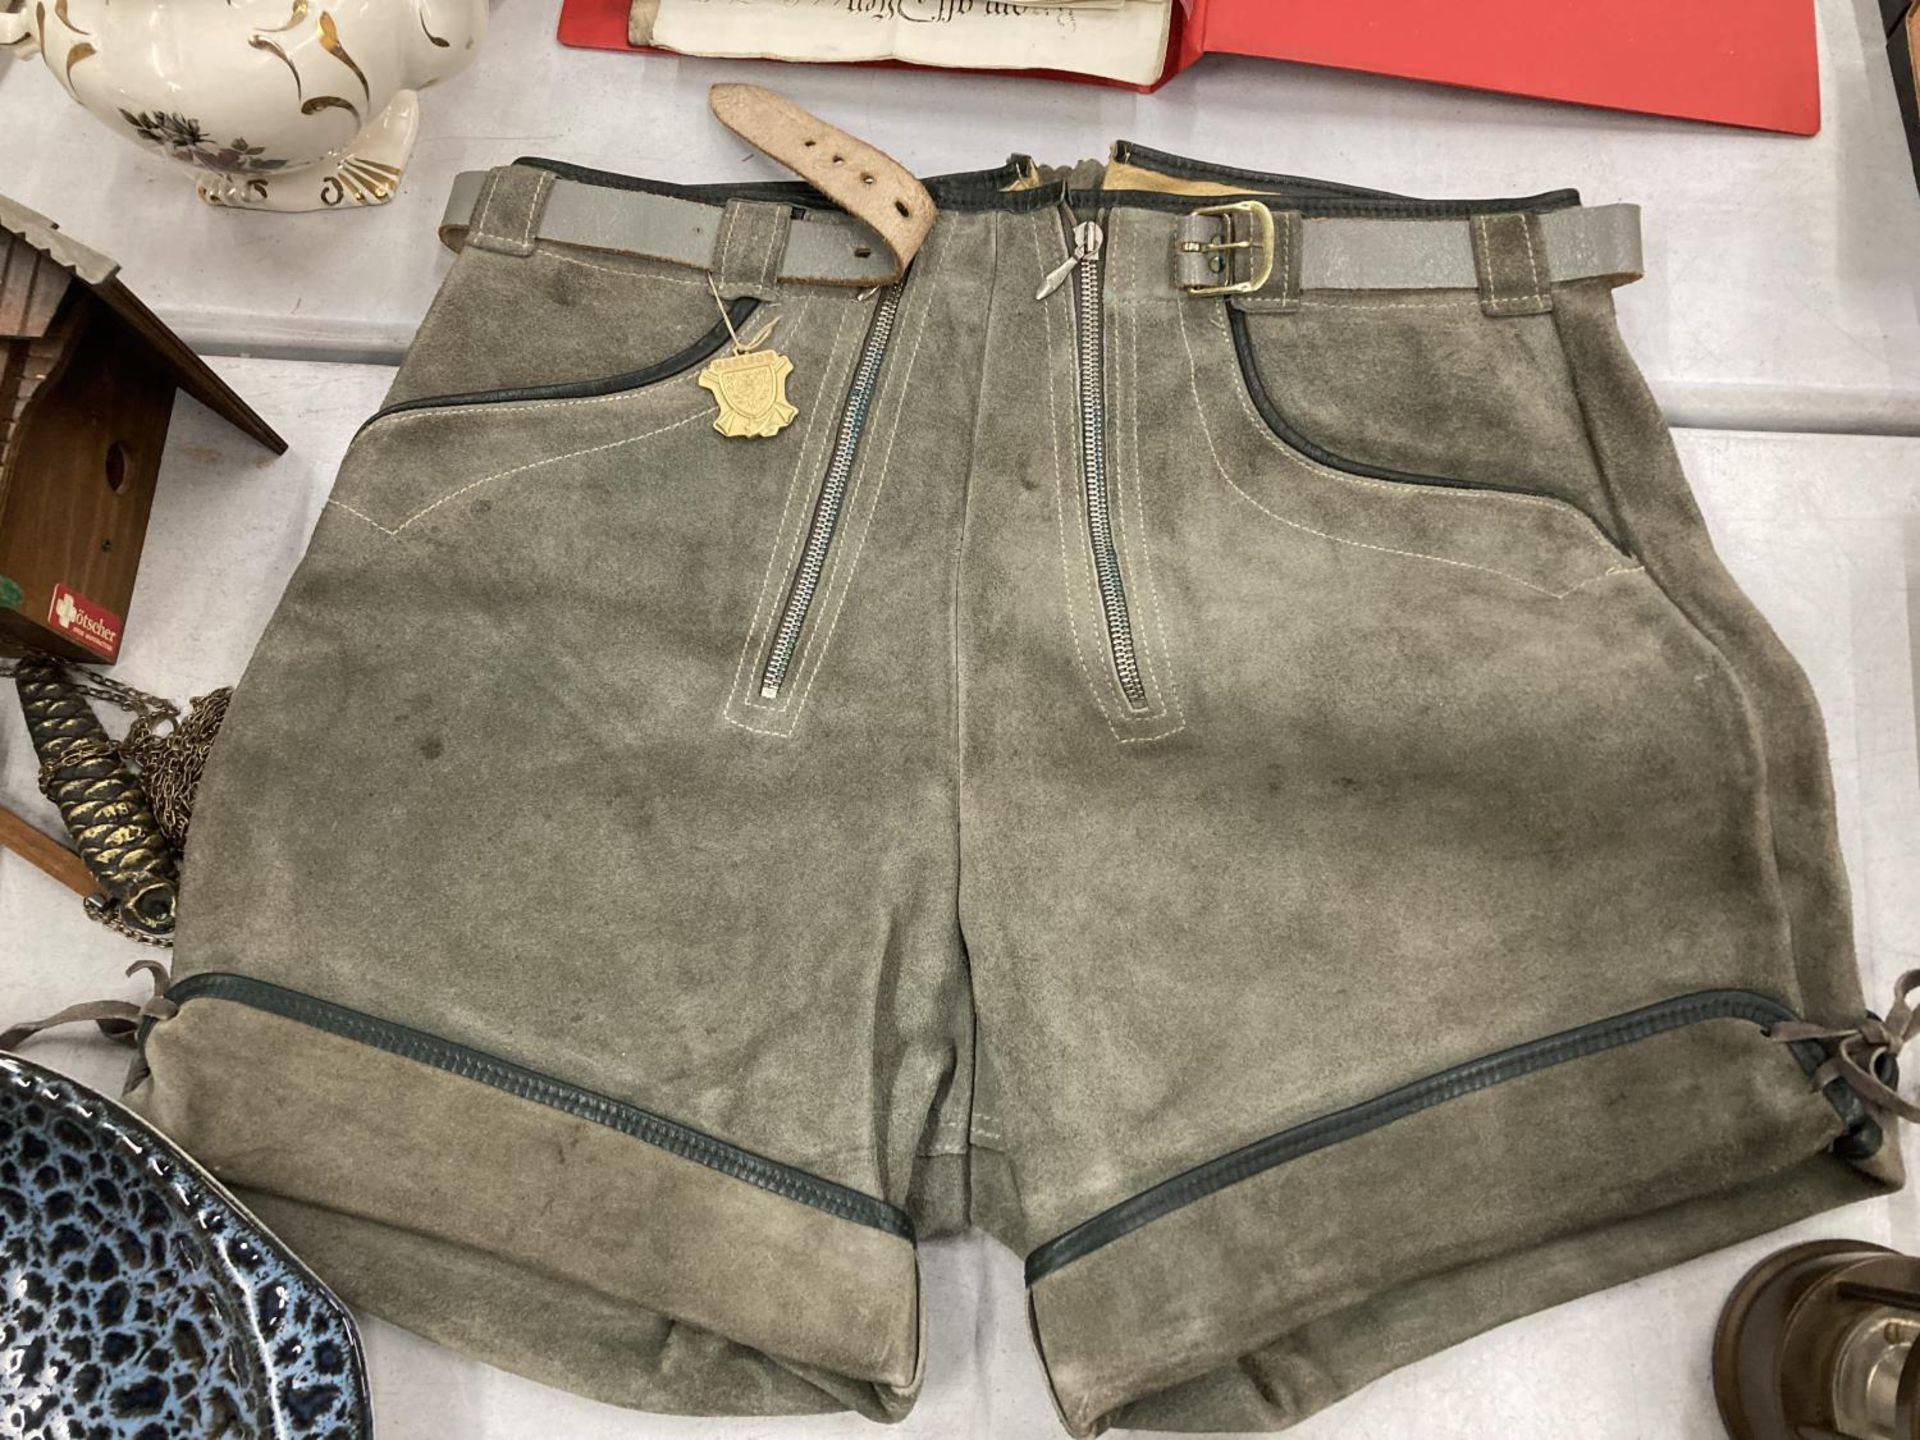 A PAIR OF SWISS/GERMAN SUEDE SHORTS - AS NEW